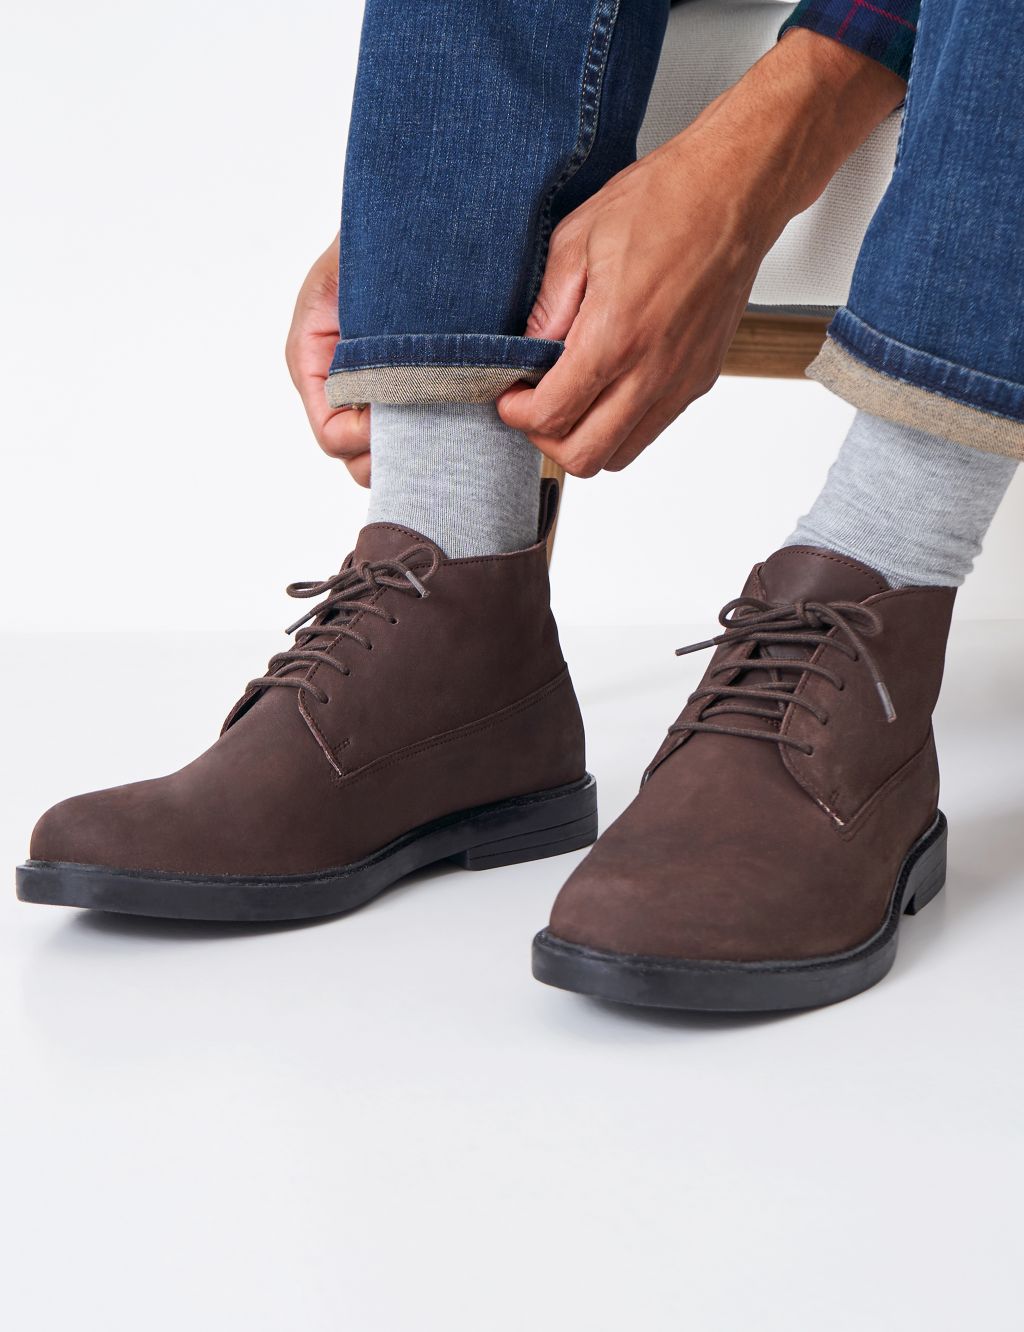 Leather Desert Boots image 1